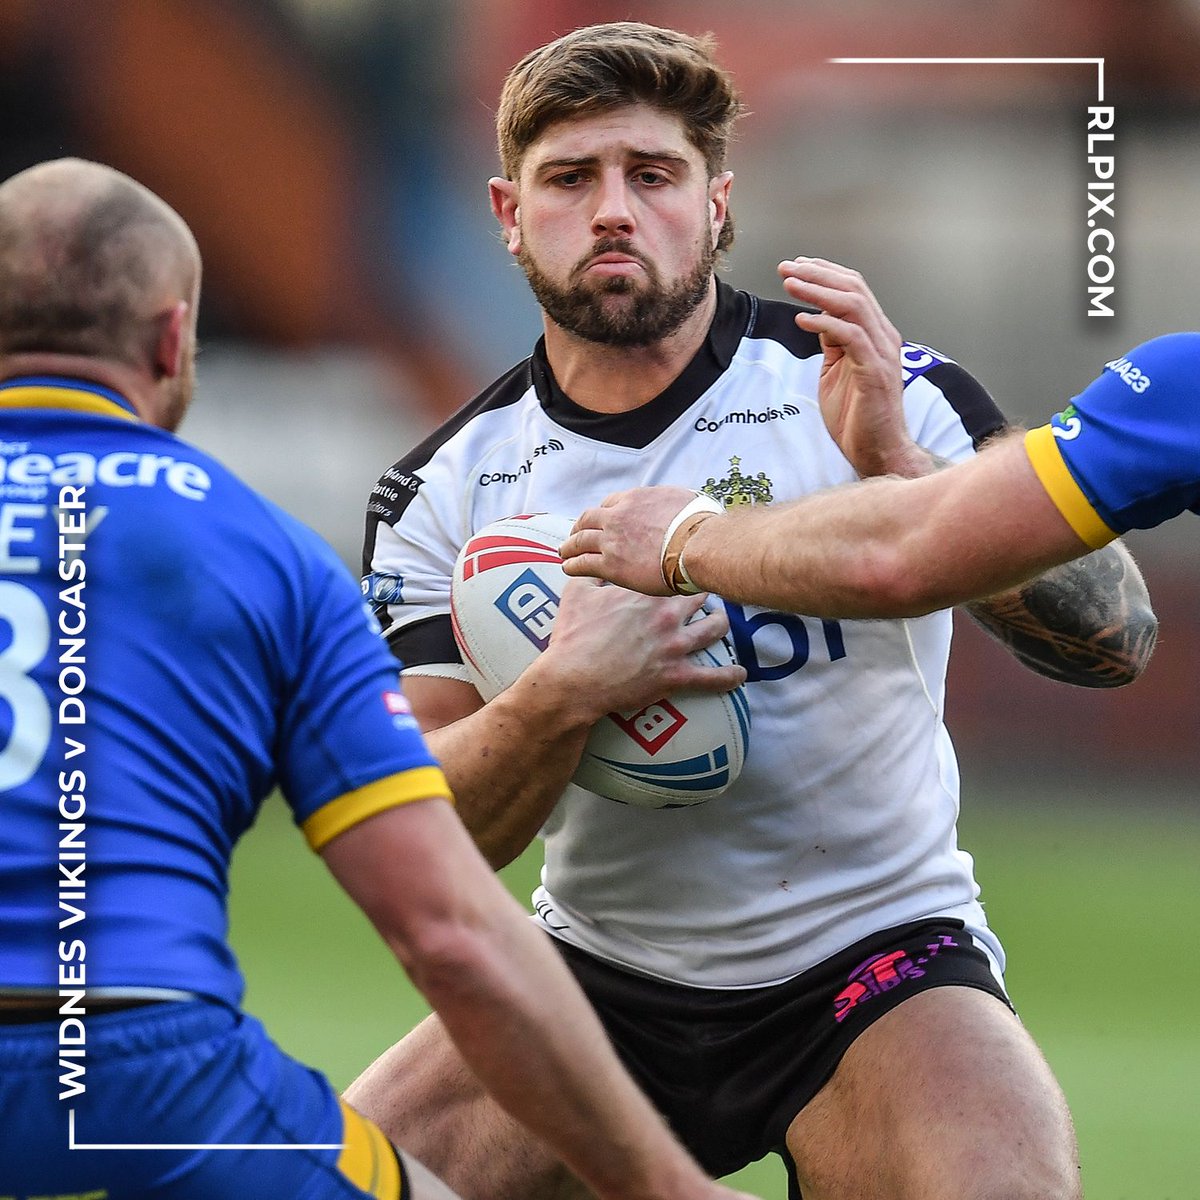 Images from @widnesrl v @doncasterrugbyleague in the @thechallengecup now online - rlpix.com #rugbyleague #rfl #widnes #widnesvikings #sportsphotography